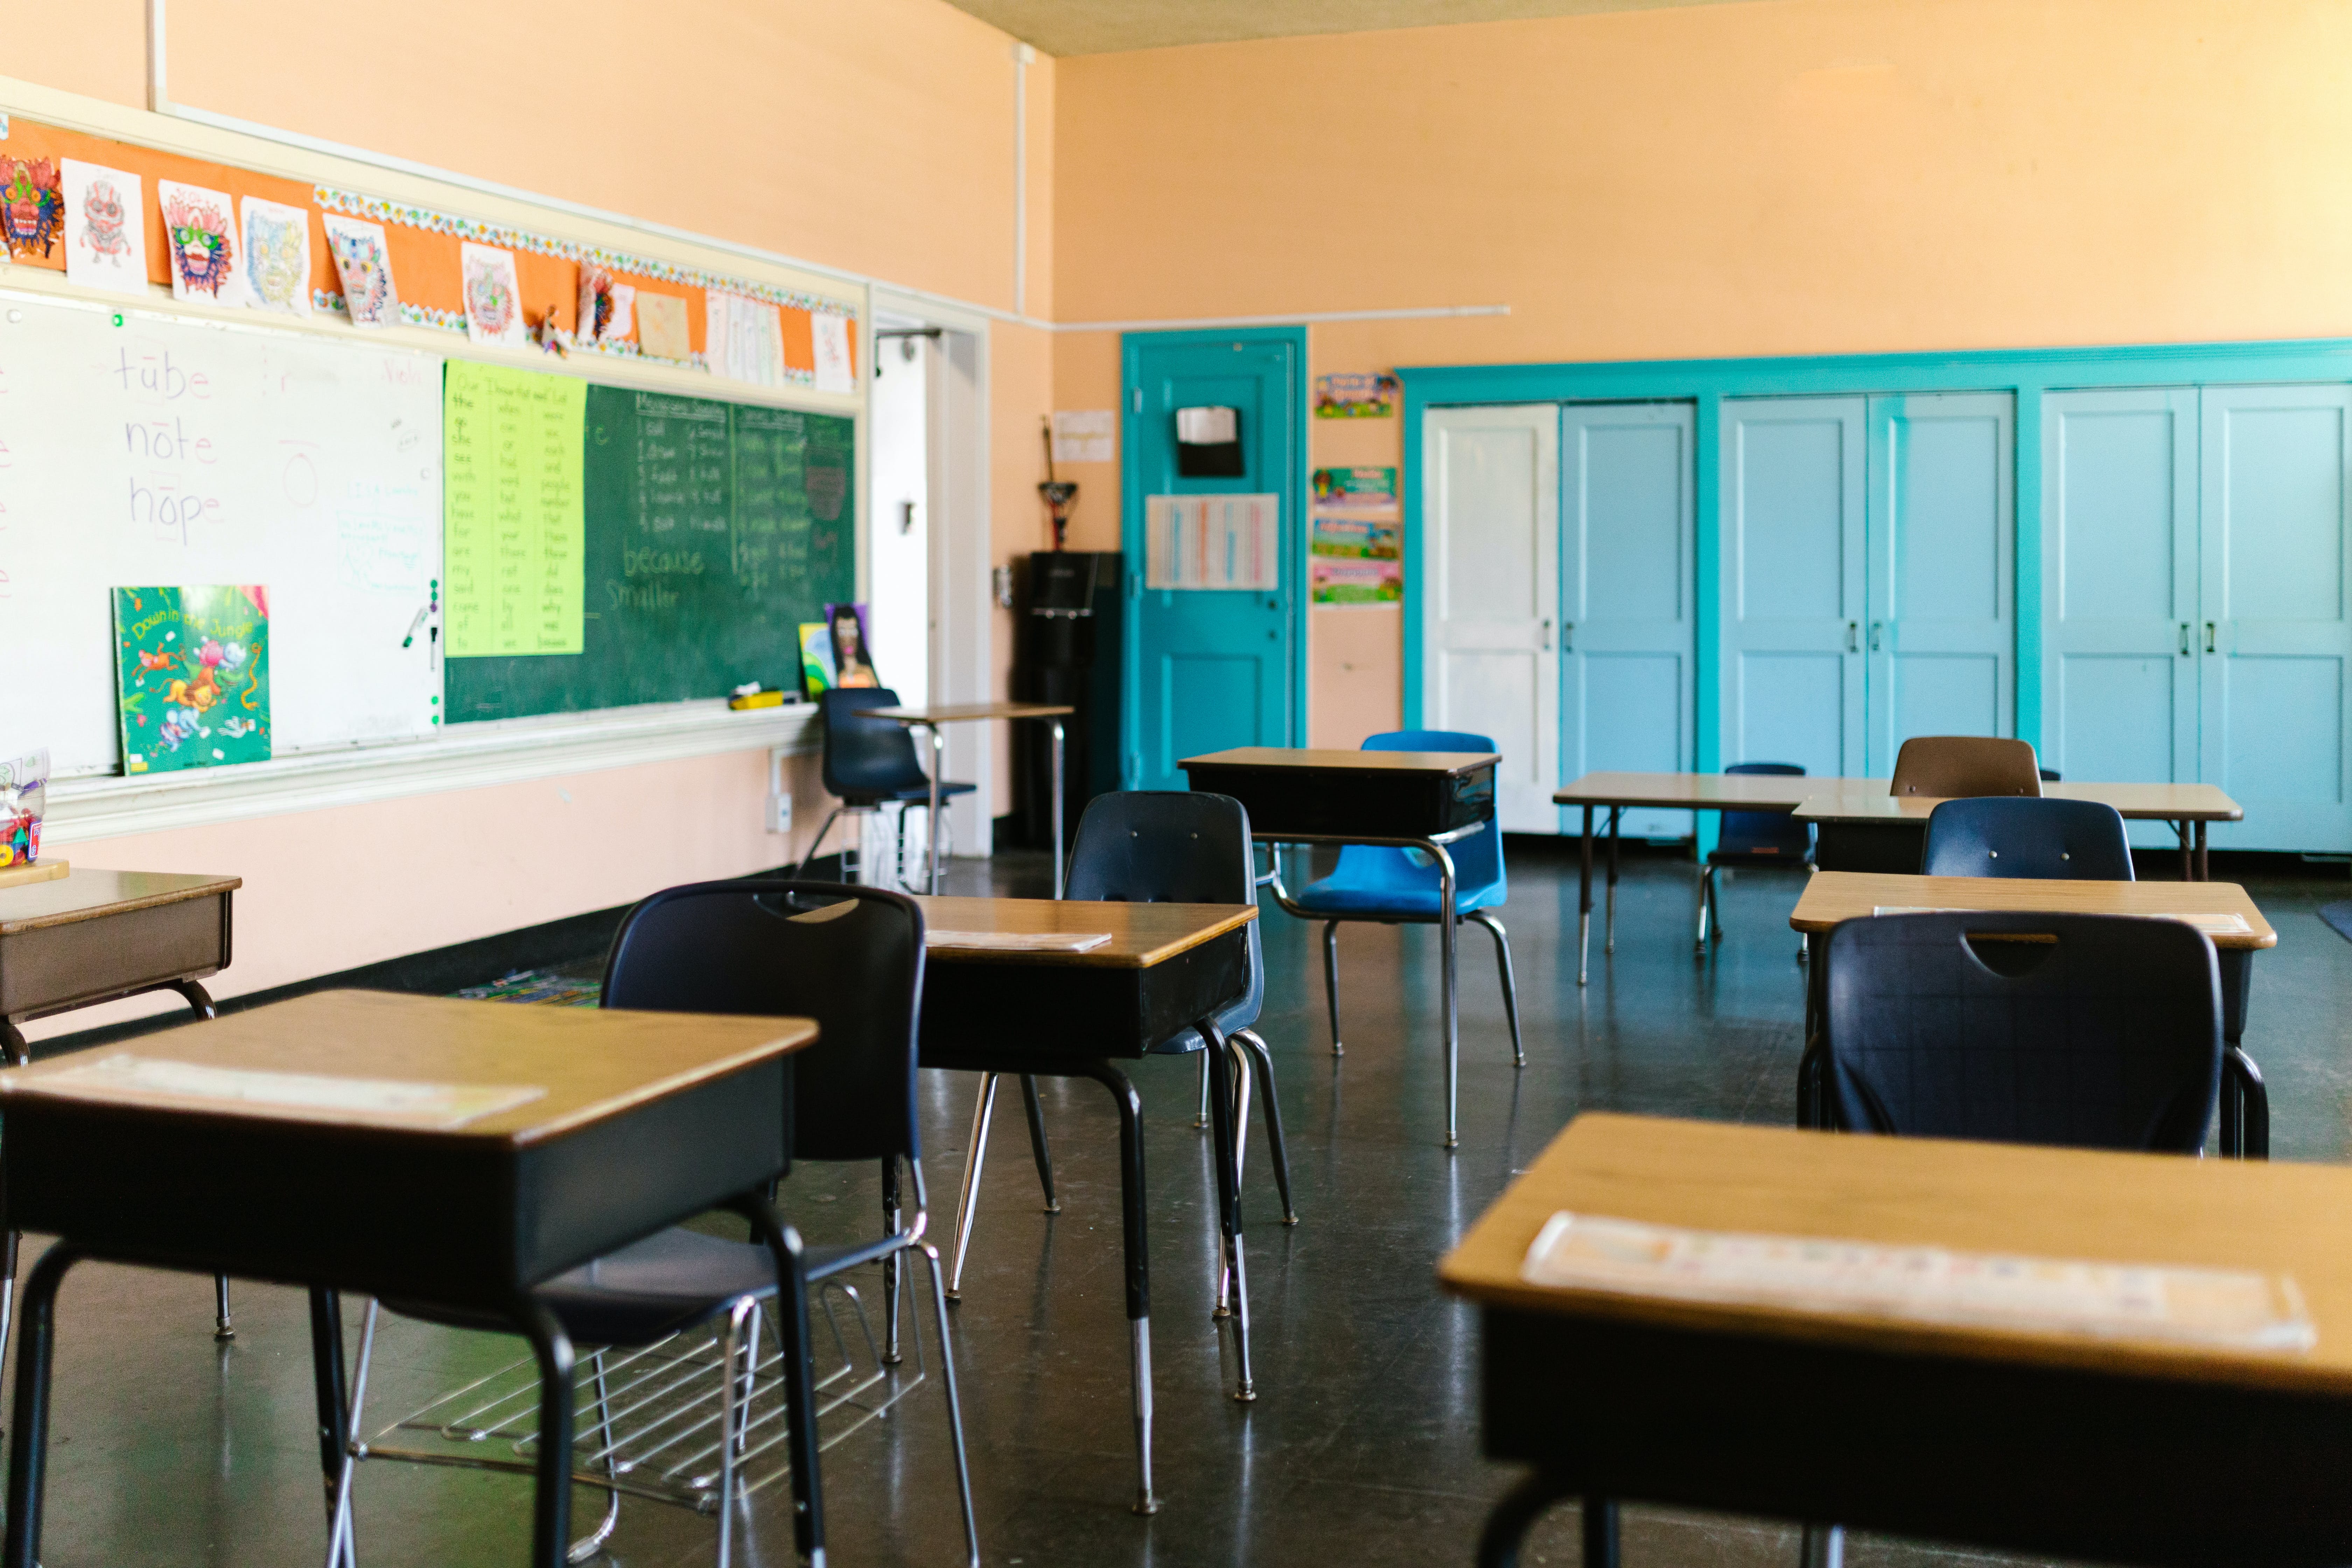 An empty classroom with desks and blue storage cupboards in the background